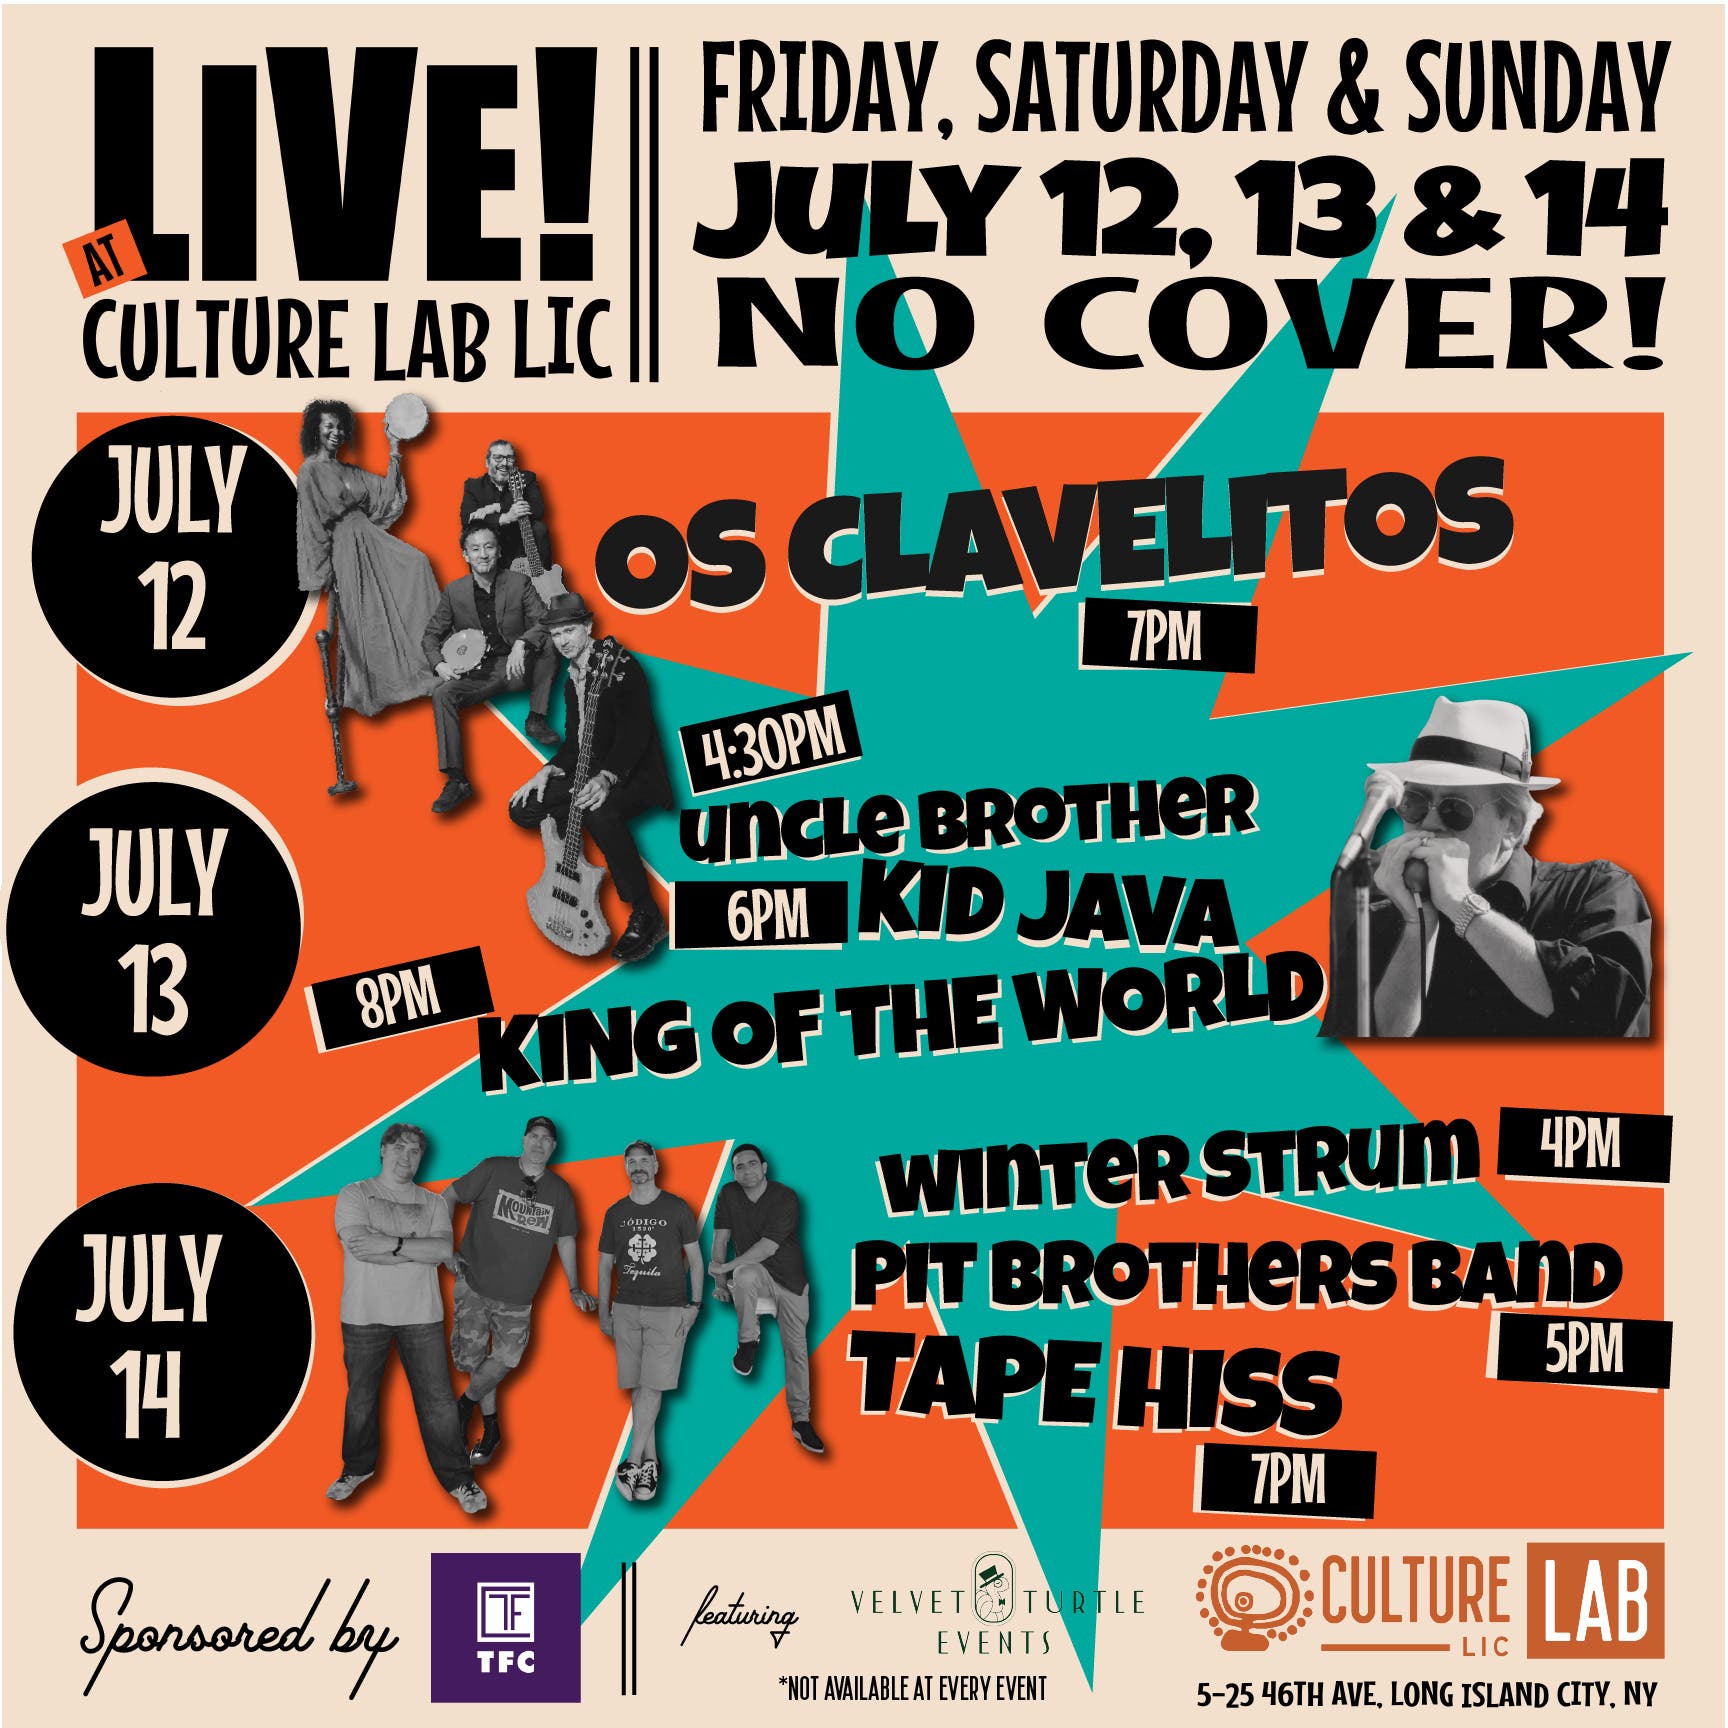 LIVE! at Culture Lab LIC - Winter Strum, Pit Brothers Band, Tape Hiss, July 14, 4pm